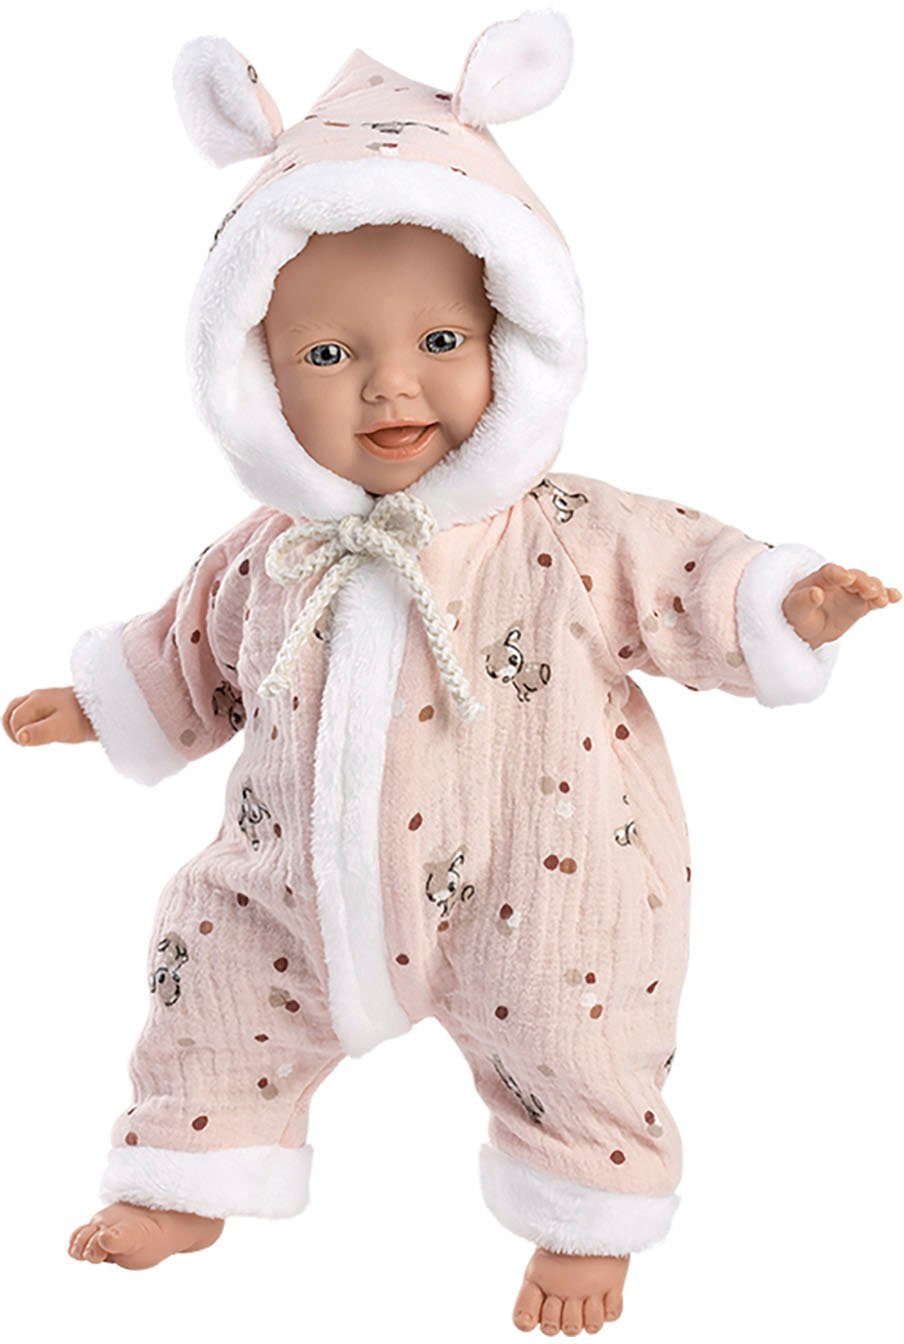 Llorens Babypuppe Babypuppe mit cm Overall, 32